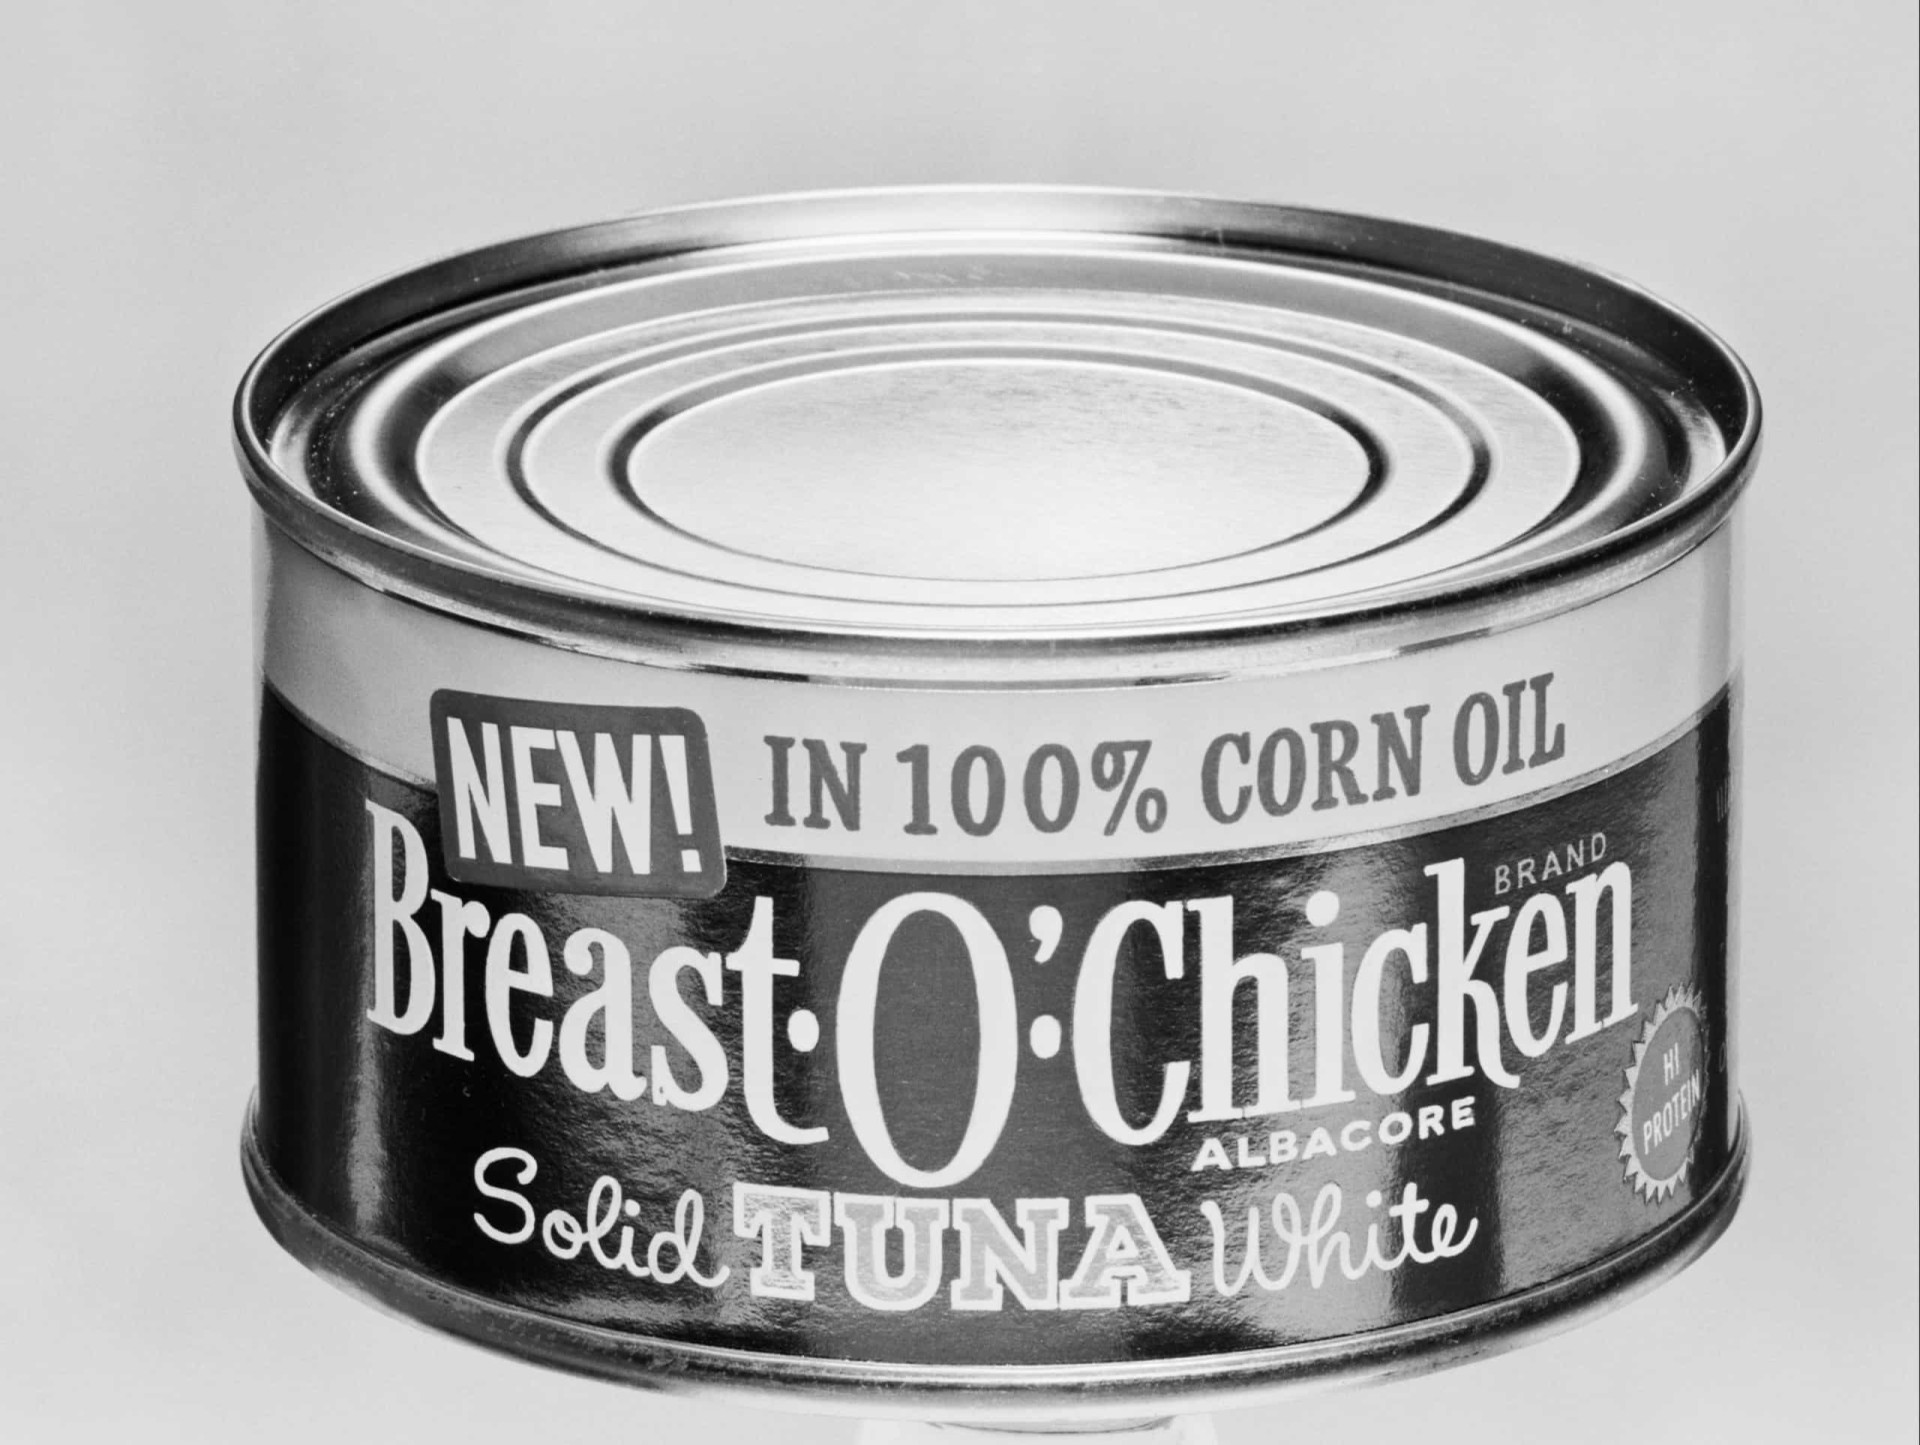 <p>Tuna was initially canned during the early 20th century. Prior to this, sardines were the sole fish enclosed in cans. Nevertheless, in 1903, when the sardine harvest off the southern California coast fell short, several ingenious cannery proprietors began filling vacant sardine cans with tuna. As a result, a fresh industry emerged.</p><p>You may also like:<a href="https://www.starsinsider.com/n/233061?utm_source=msn.com&utm_medium=display&utm_campaign=referral_description&utm_content=578219en-en"> 2000s heartthrobs: where are they now?</a></p>